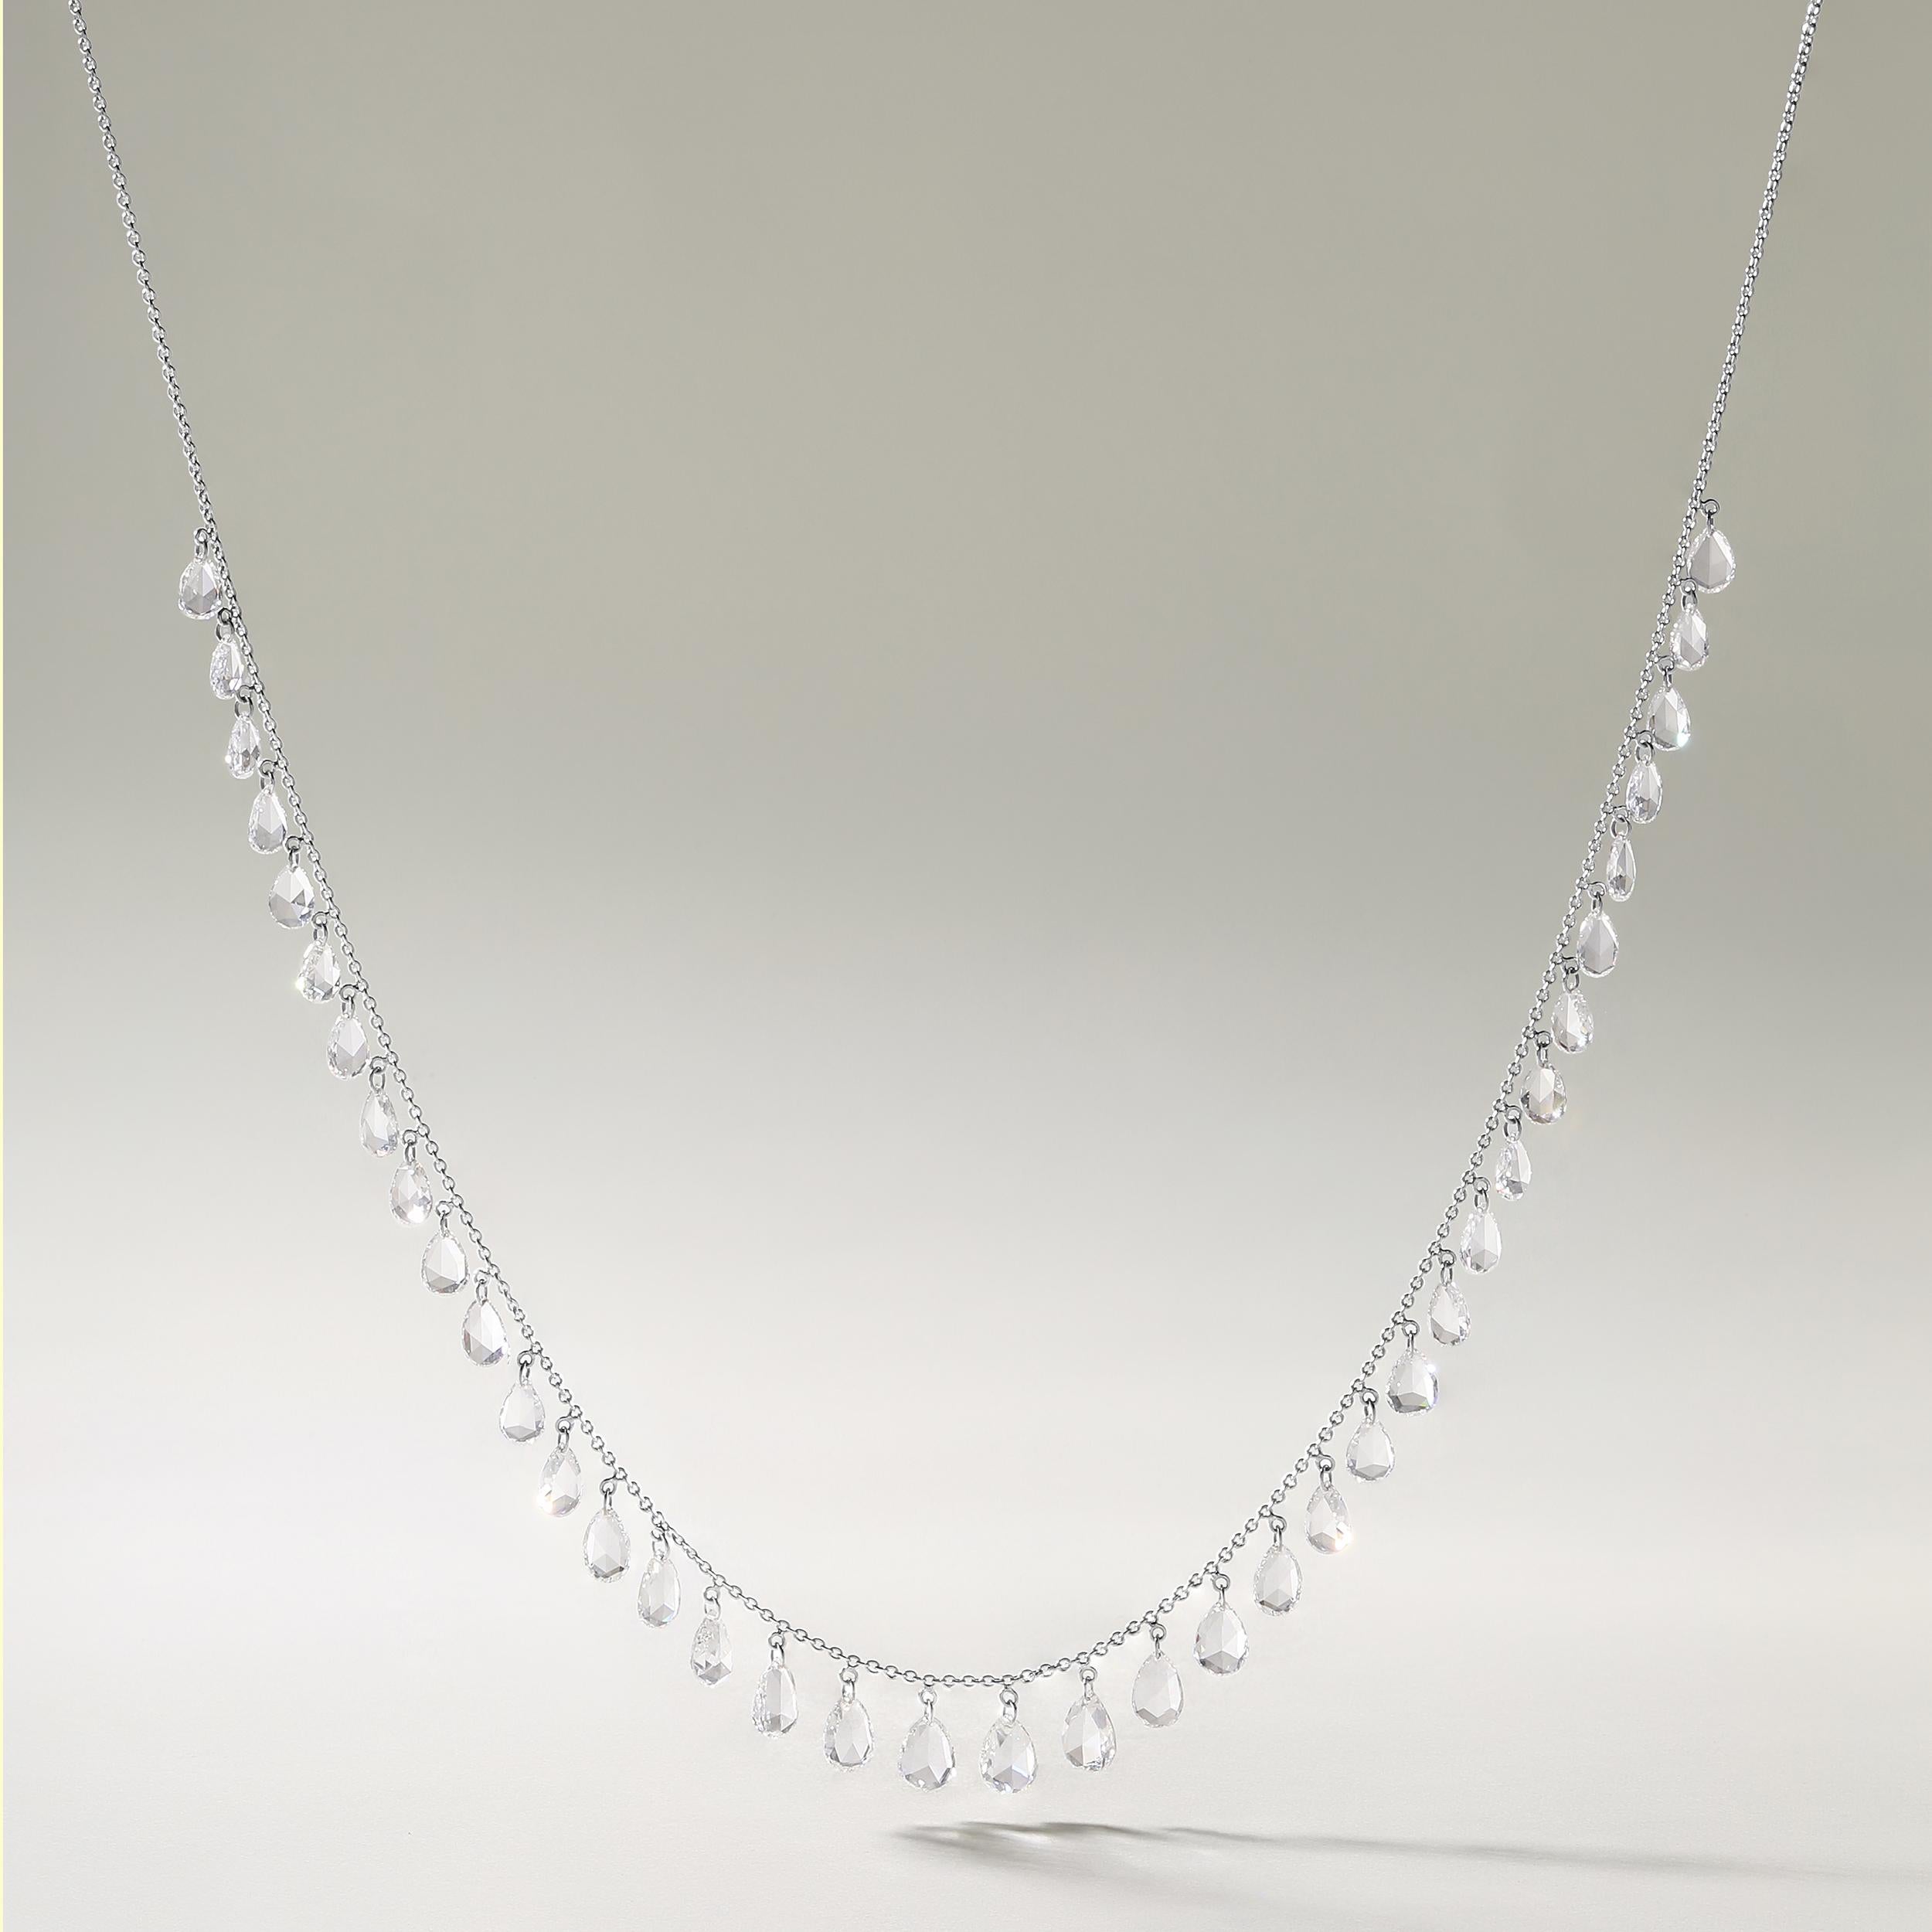 Crafted in 3.28 grams of 18K White Gold, the necklace contains 38 stones of Pear Shaped Rose Cut Natural Natural Diamonds with a total of 5.9 carat in E-F color and VVS-VS clarity. The necklace length is 18 inches.

CONTEMPORARY AND TIMELESS